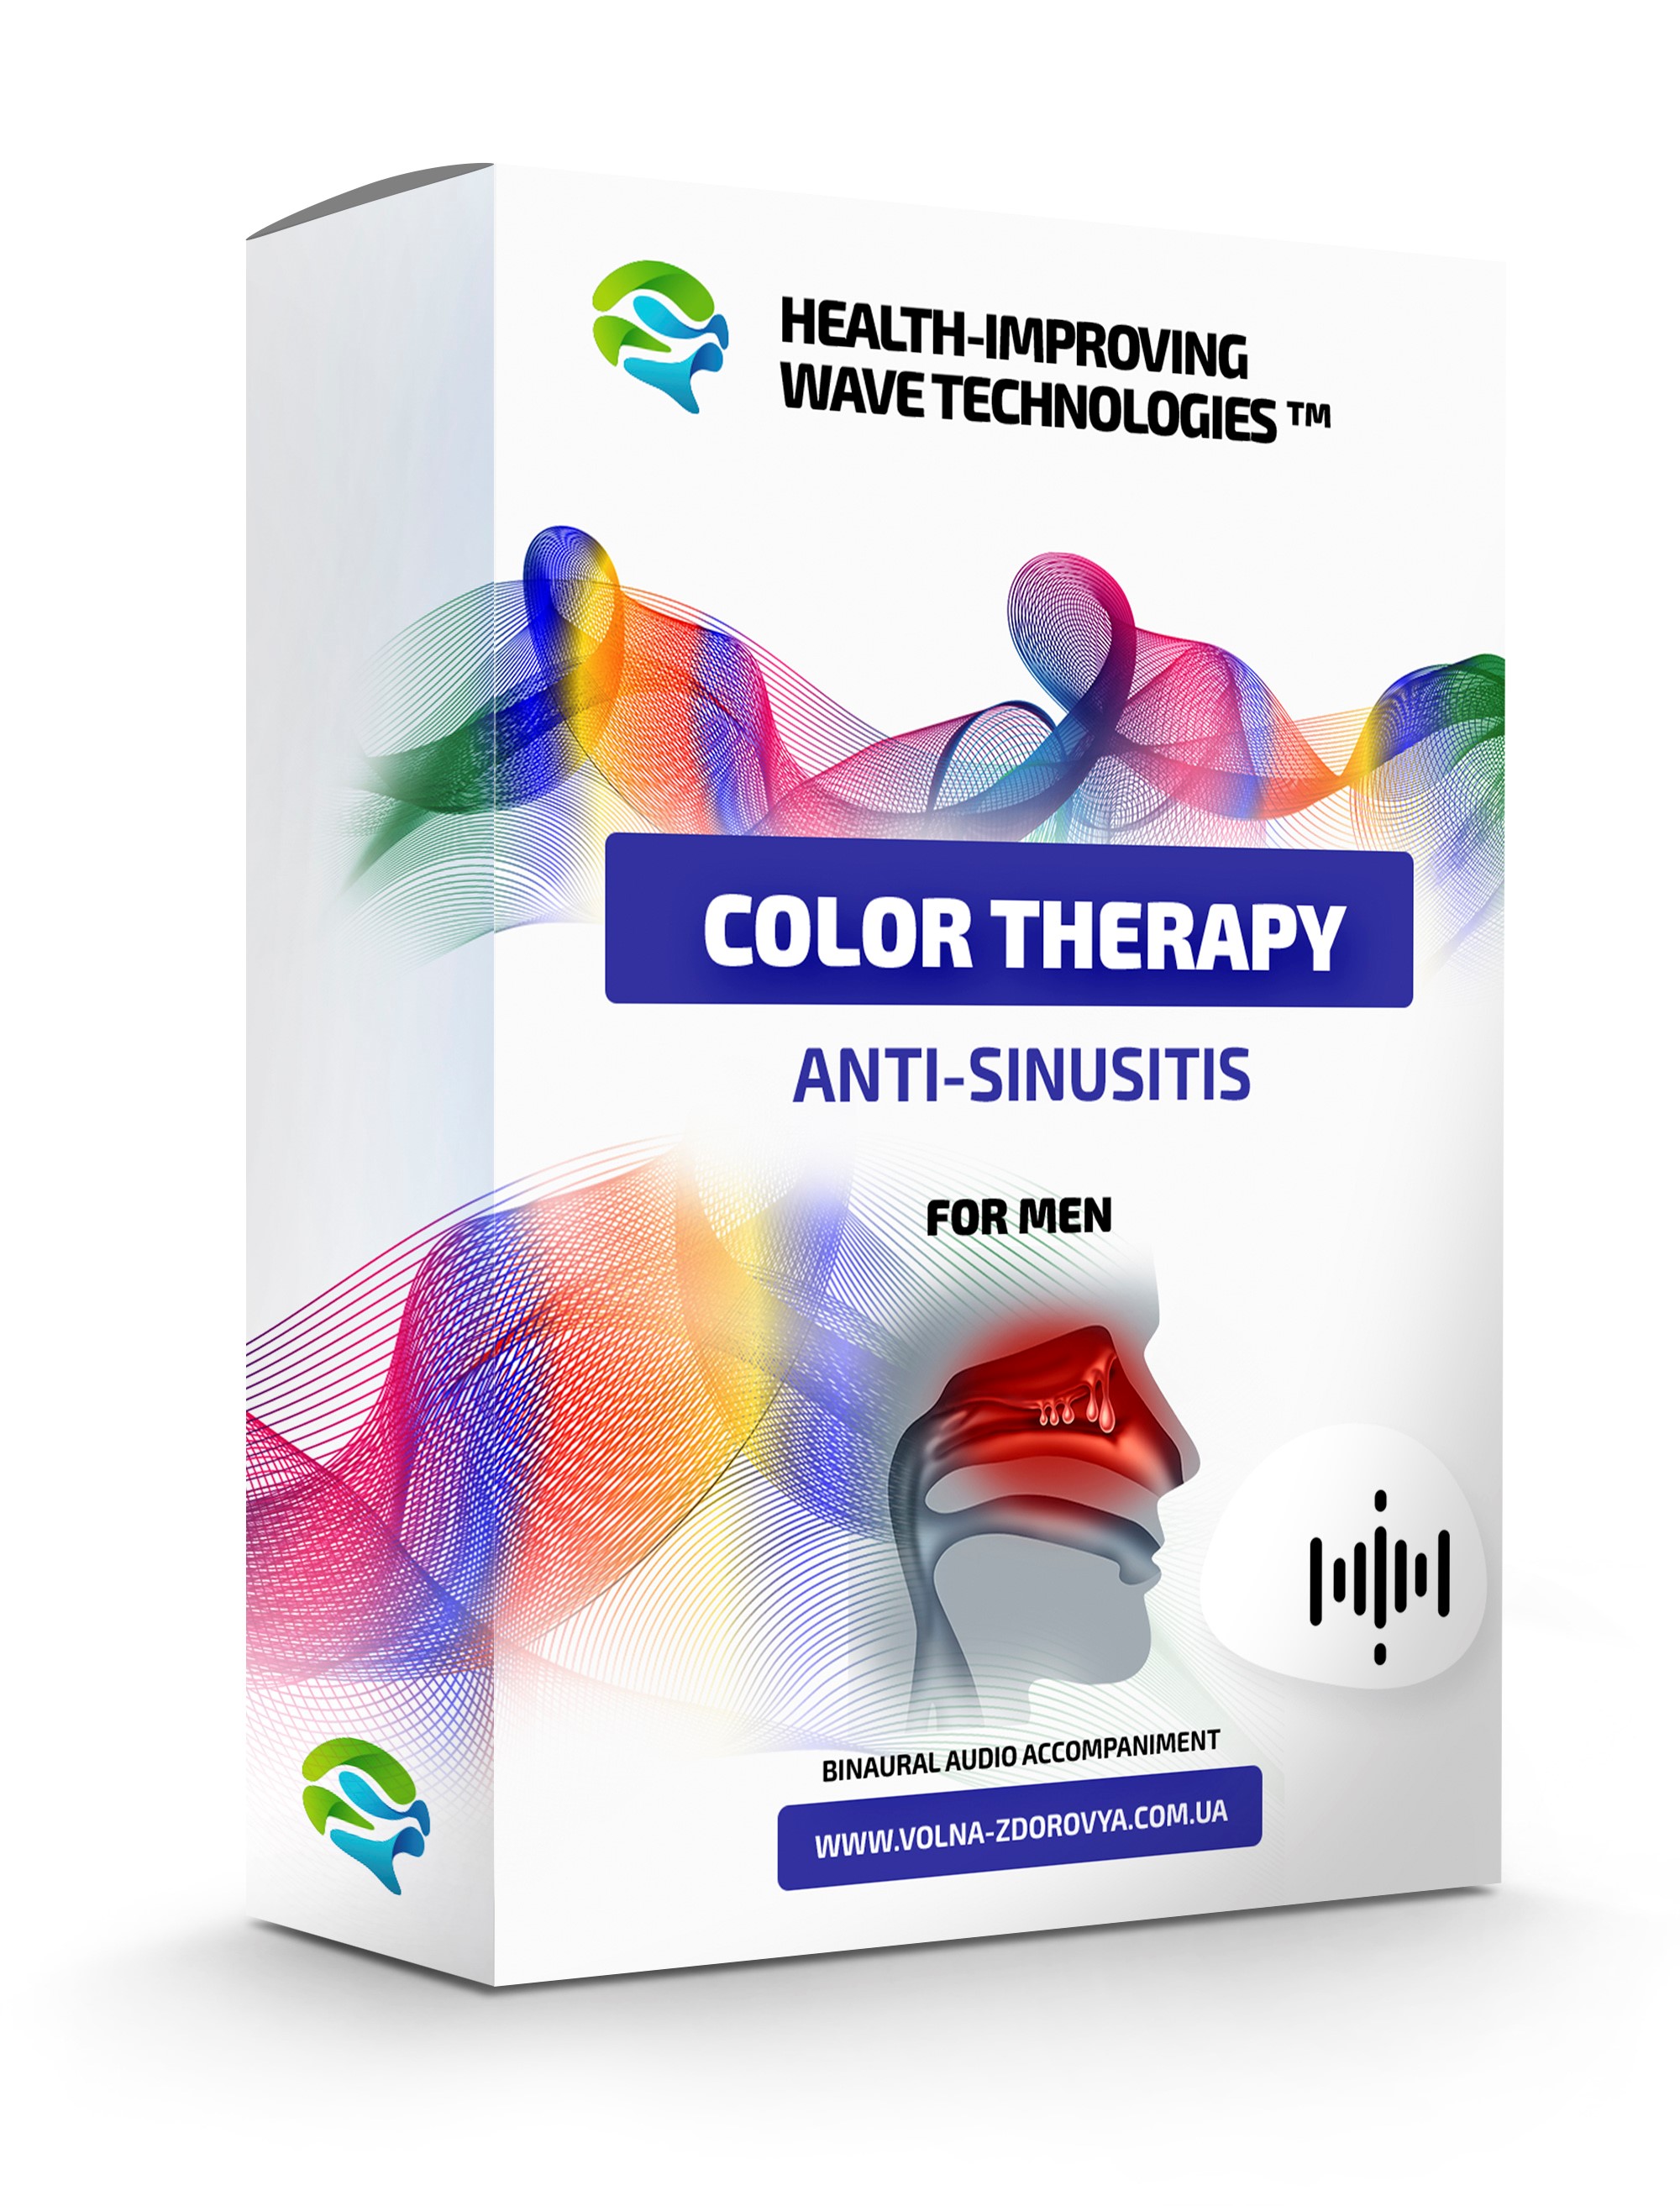 Сolor therapy - Anti-Sinusitis. For men